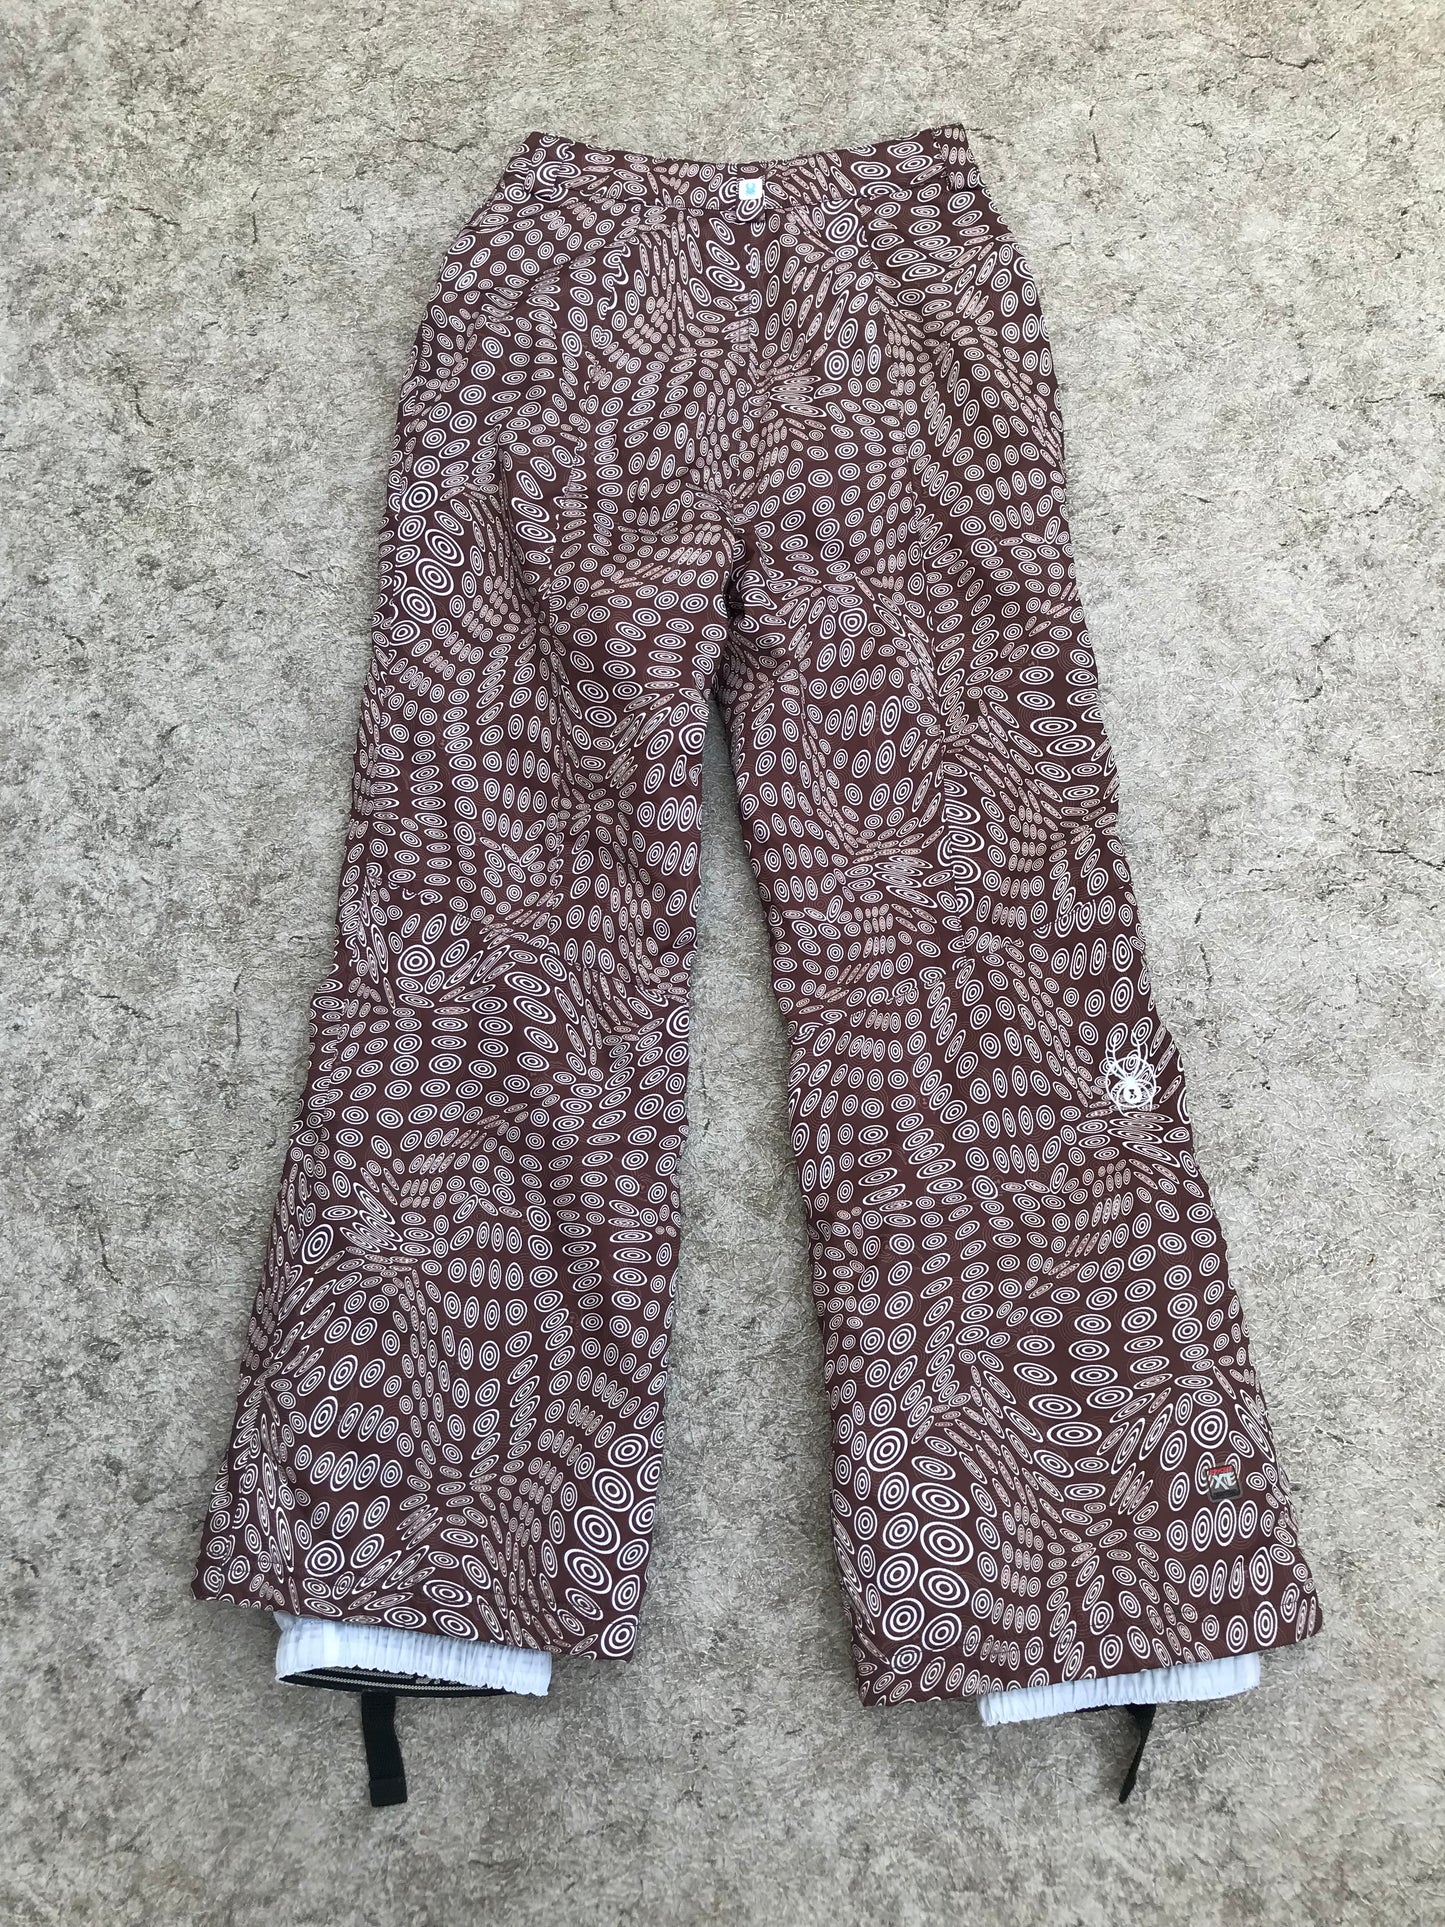 Snow Pants Child Size 16 Youth Spyder Brown Cream Outstanding Quality New Demo Model